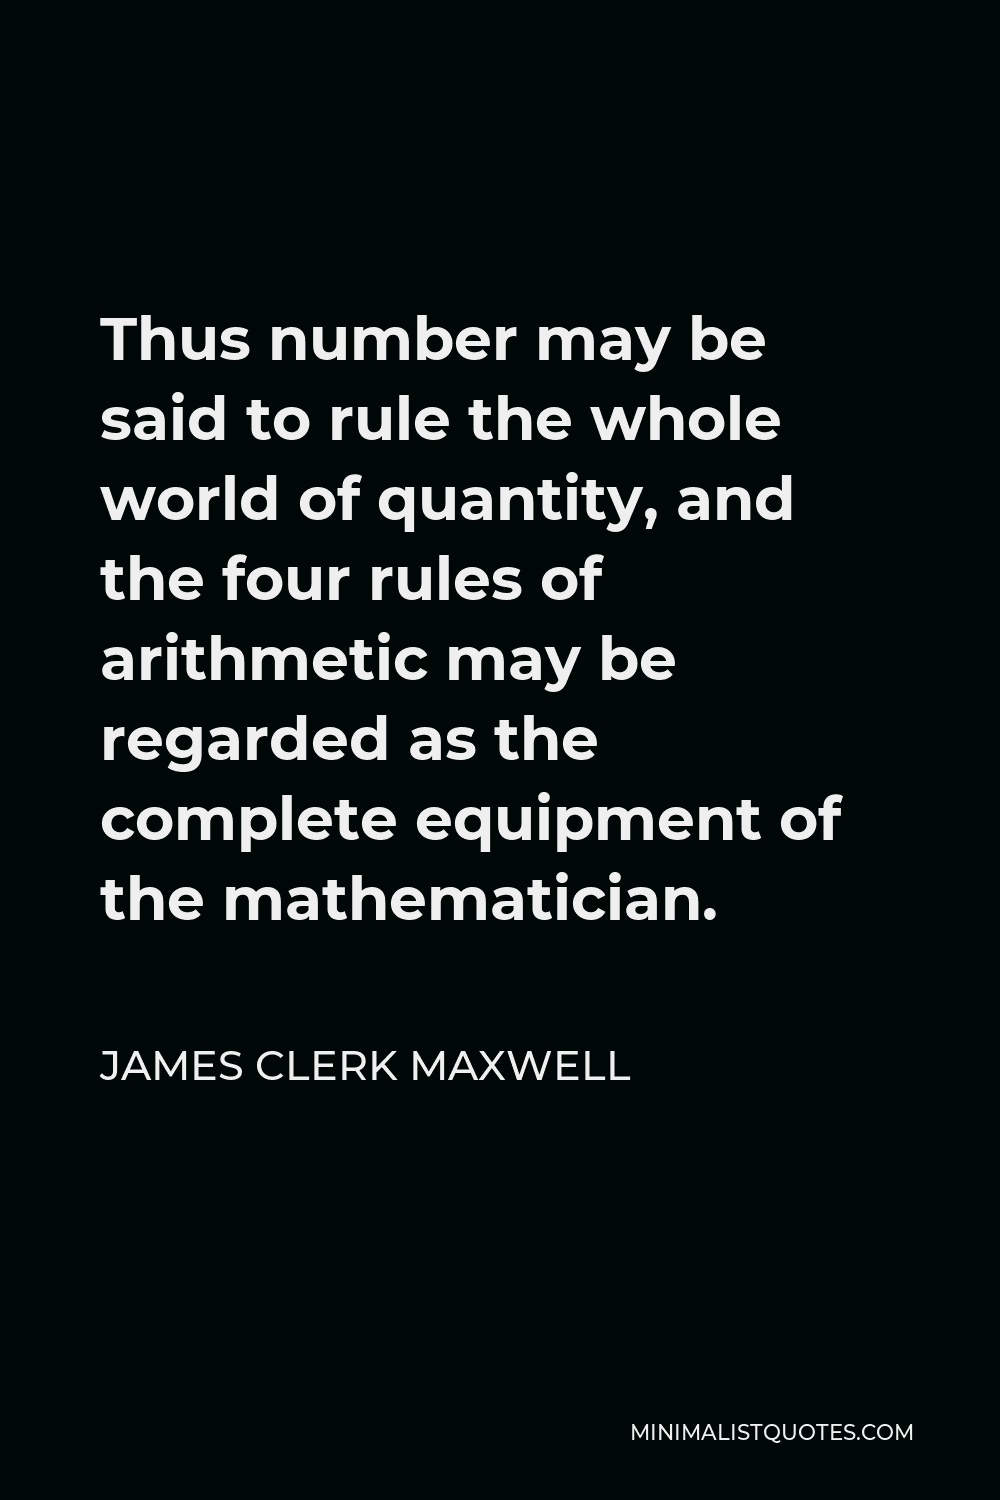 James Clerk Maxwell Quote - Thus number may be said to rule the whole world of quantity, and the four rules of arithmetic may be regarded as the complete equipment of the mathematician.